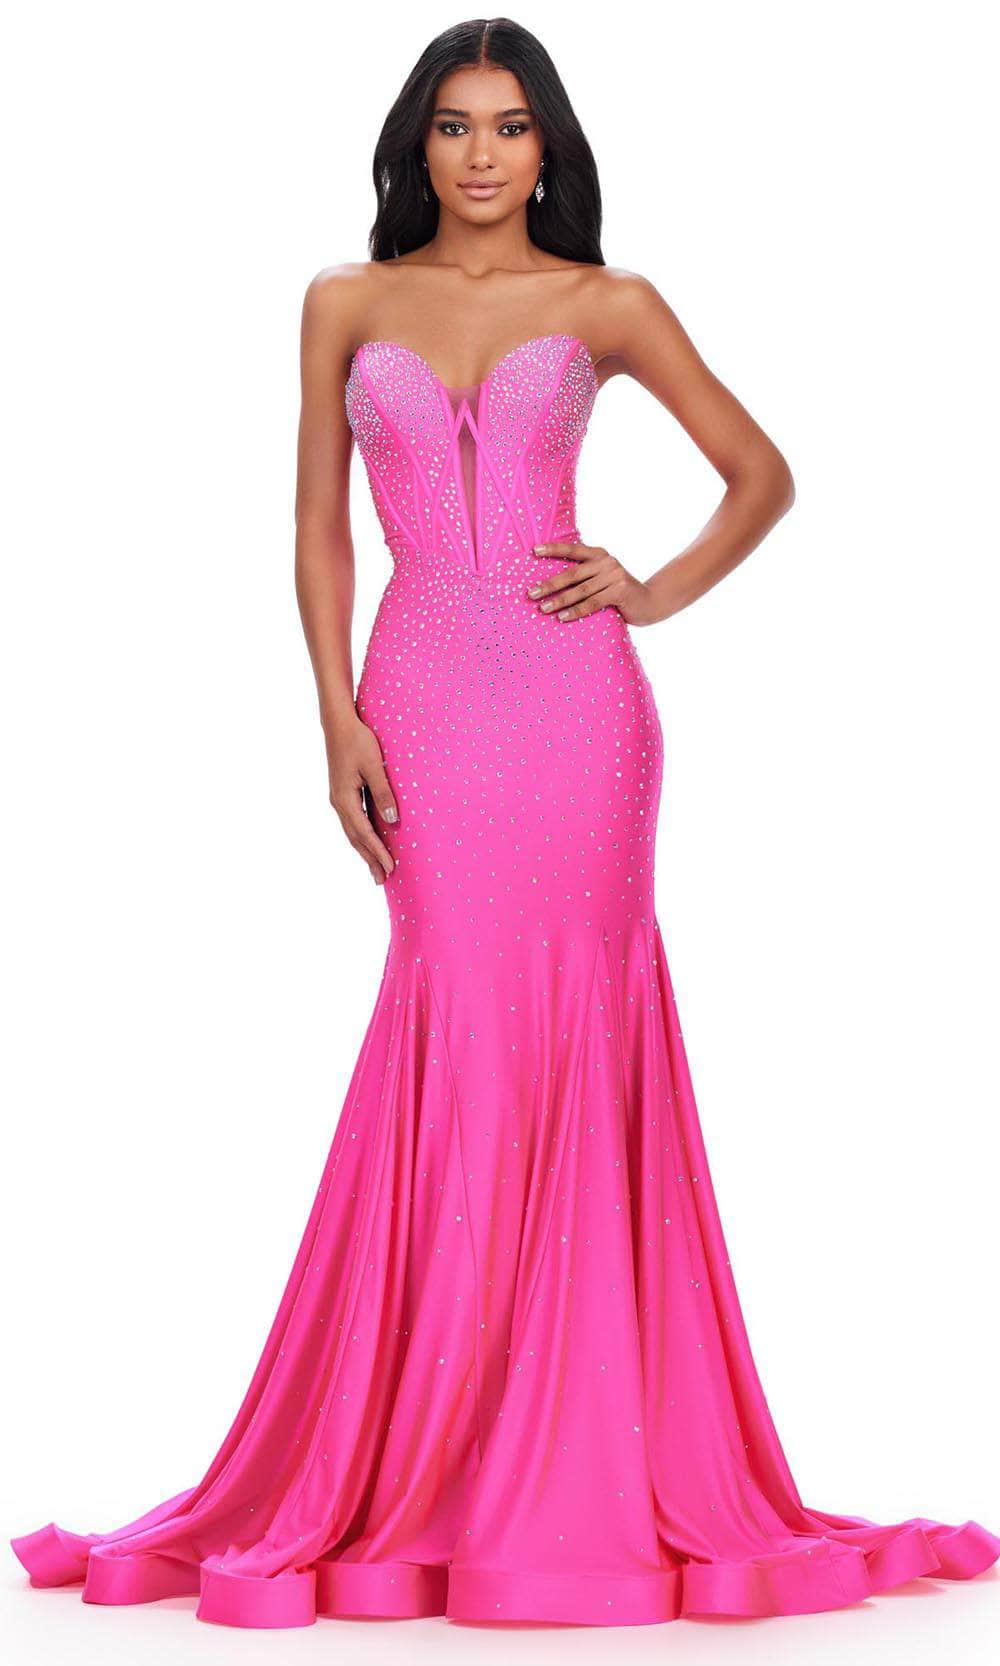 Image of Ashley Lauren 11560 - Plunging Sweetheart Beaded Evening Gown